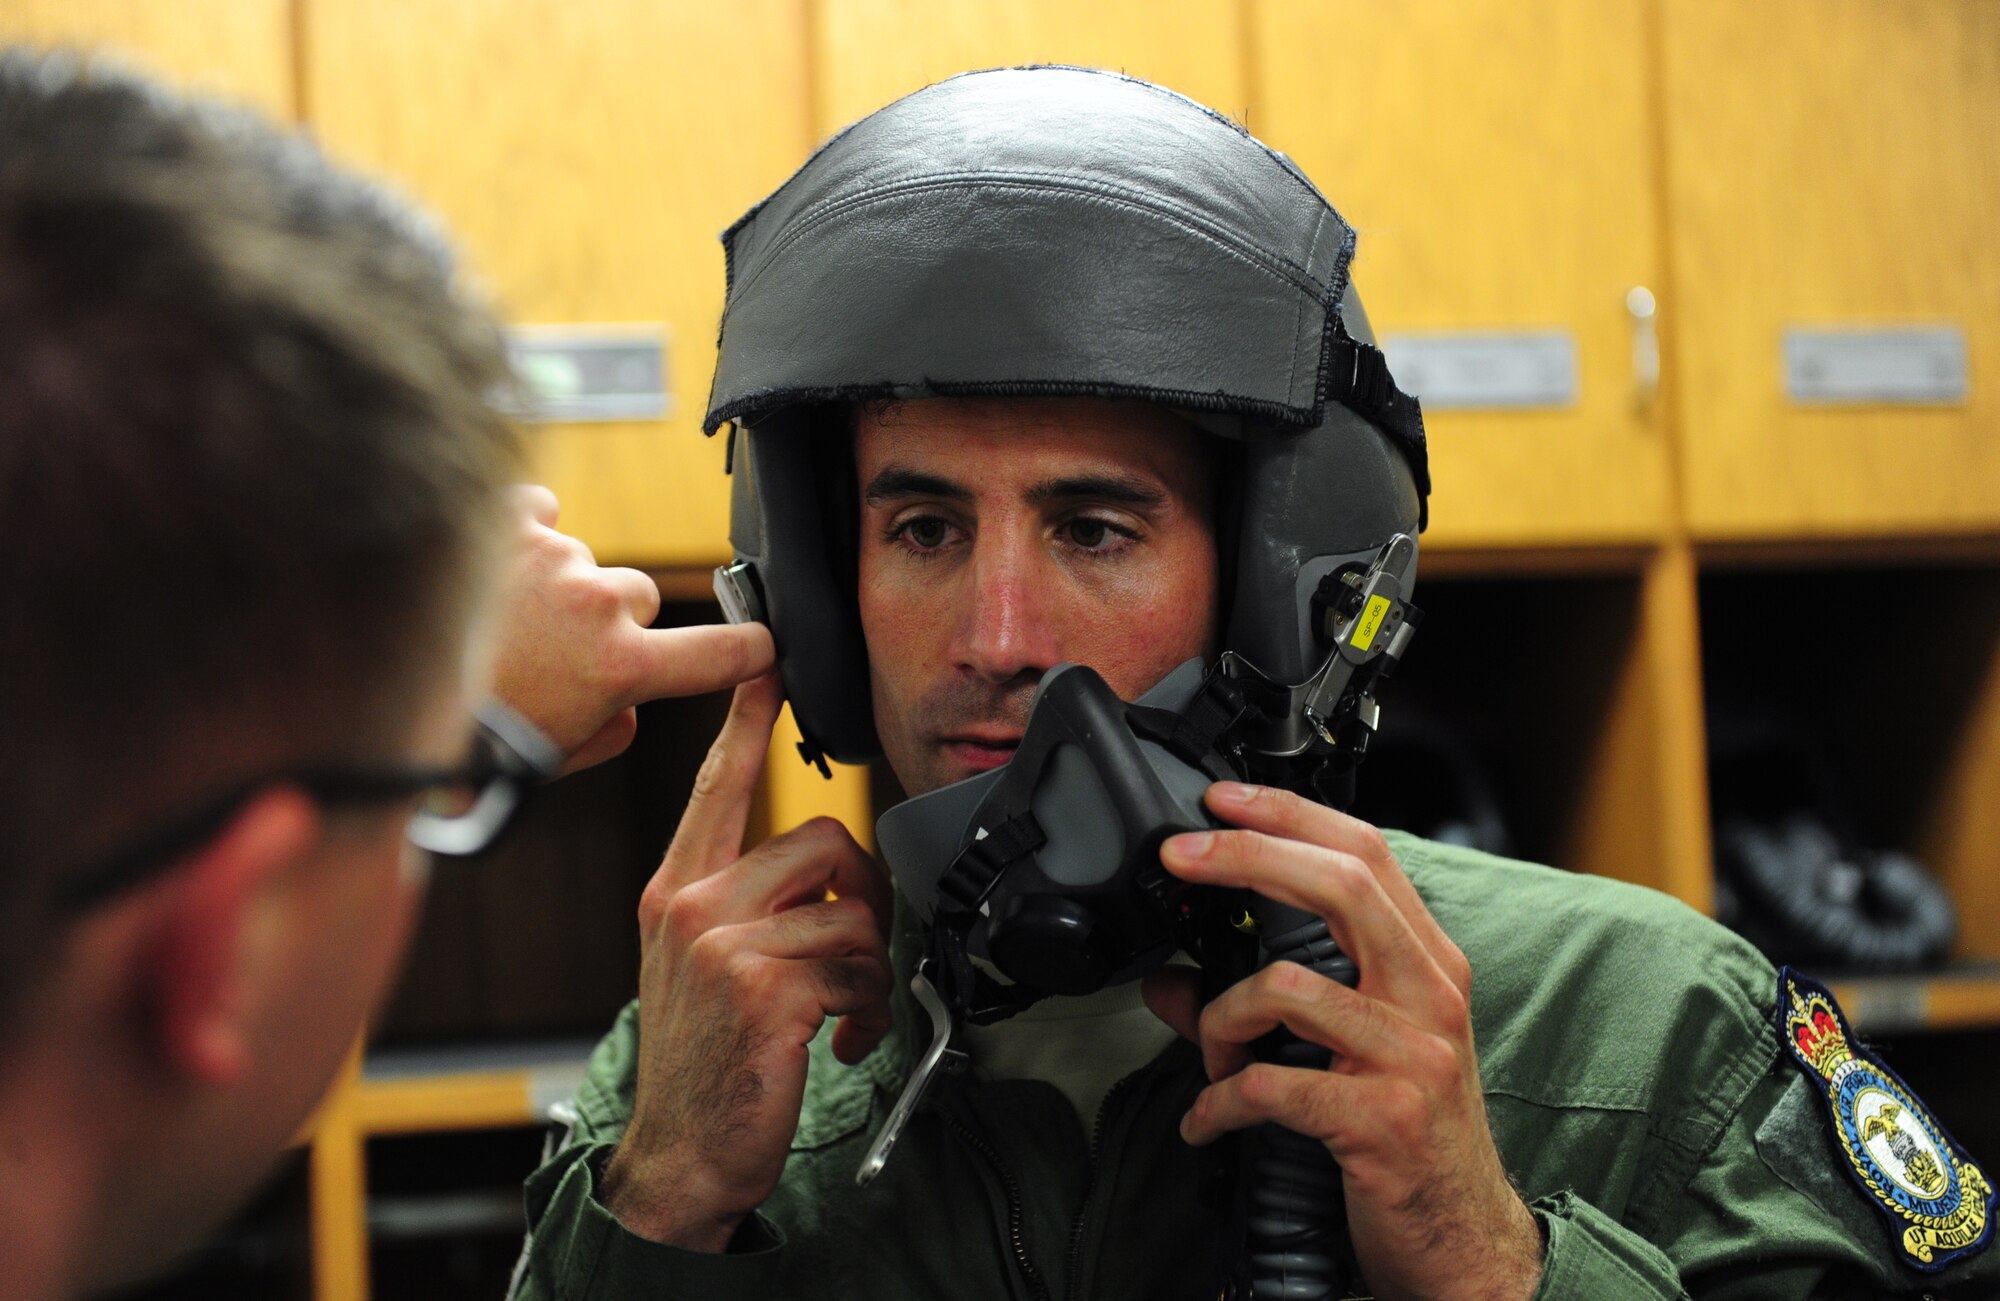 Tech. Sgt. Andrew Jones, 509th Aircraft Maintenance Squadron dedicated crew chief, gets his flight equipment checked before his incentive flight in a B-2 Spirit at Whiteman Air Force Base, Mo., July 10, 2015. Jones was awarded an incentive flight in the B-2 Spirit for being named the 2013 Air Force Global Strike Command Crew Chief of the Year. Two other Crew Chiefs of the Year were also given incentive flights the same day. (U.S. Air Force photo by Senior Airman Joel Pfiester/Released)